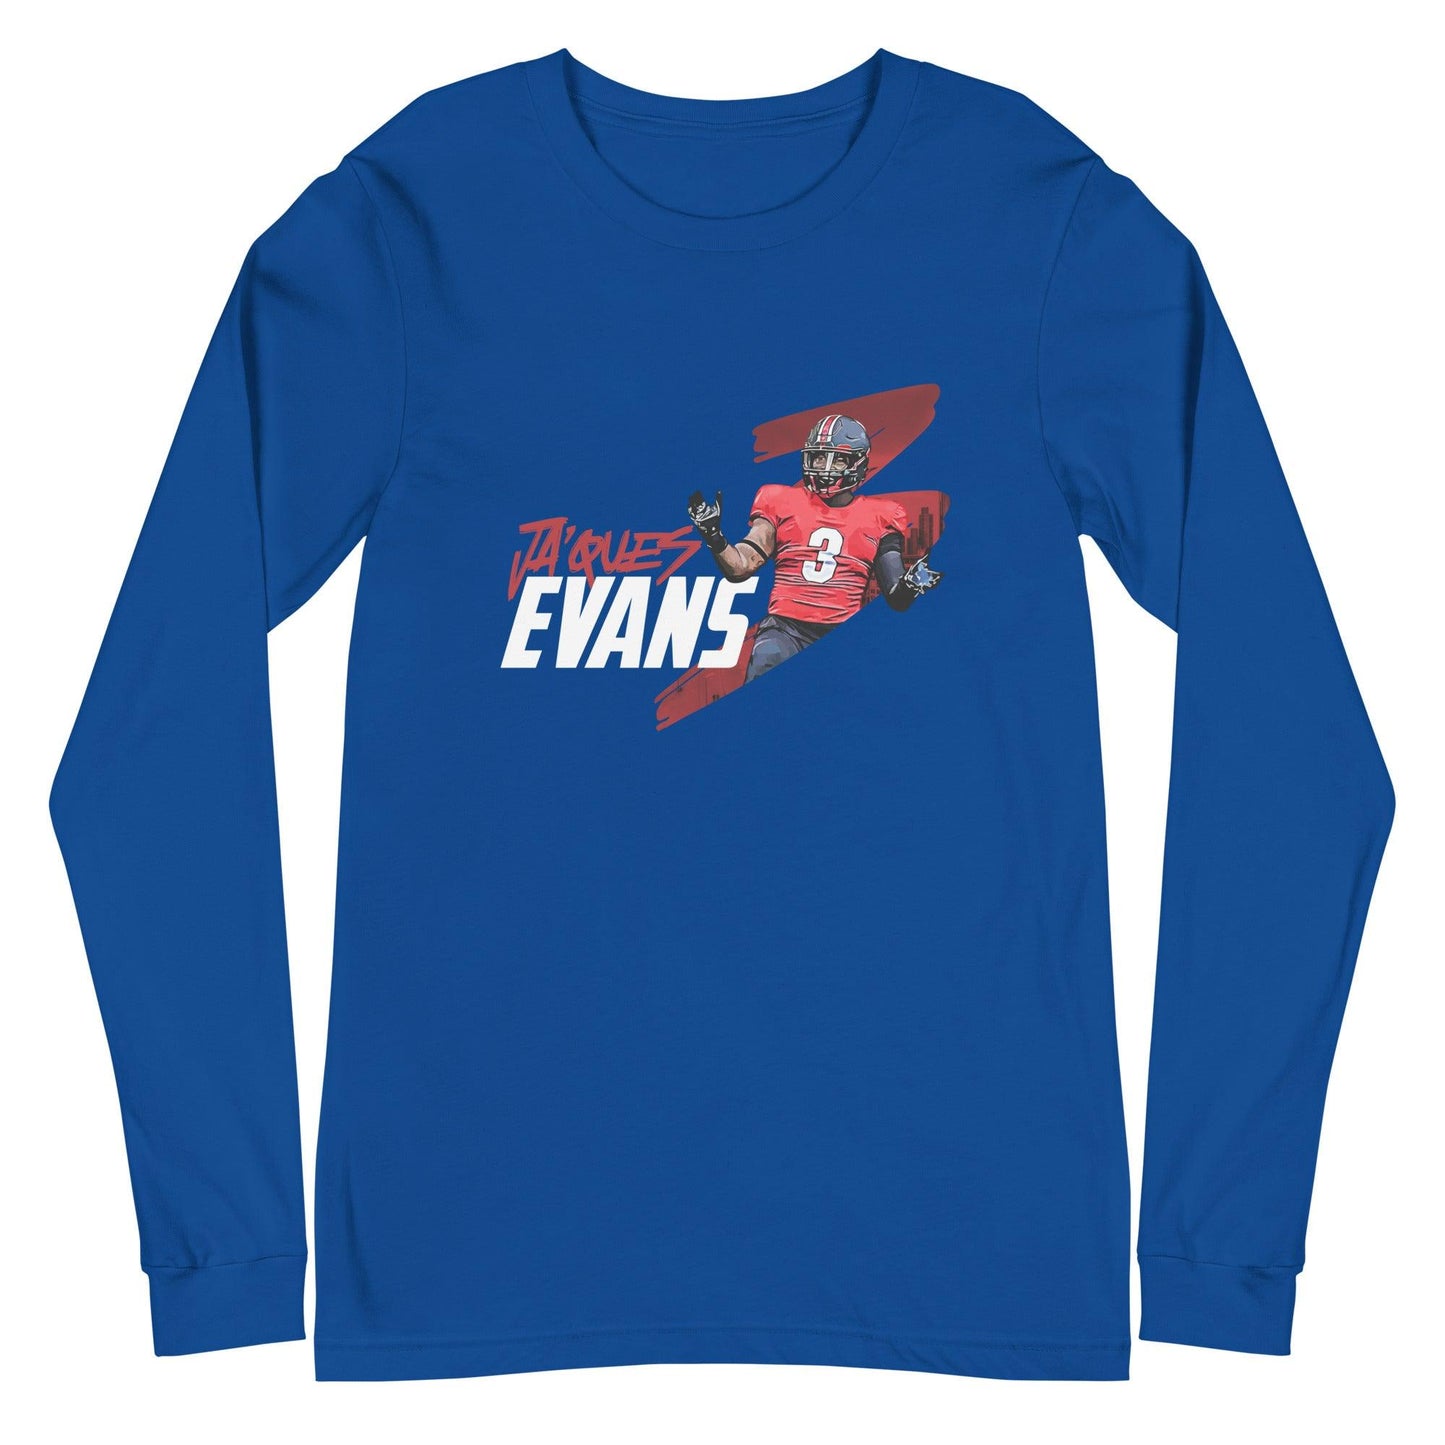 Jaques Evans "Gameday" Long Sleeve Tee - Fan Arch